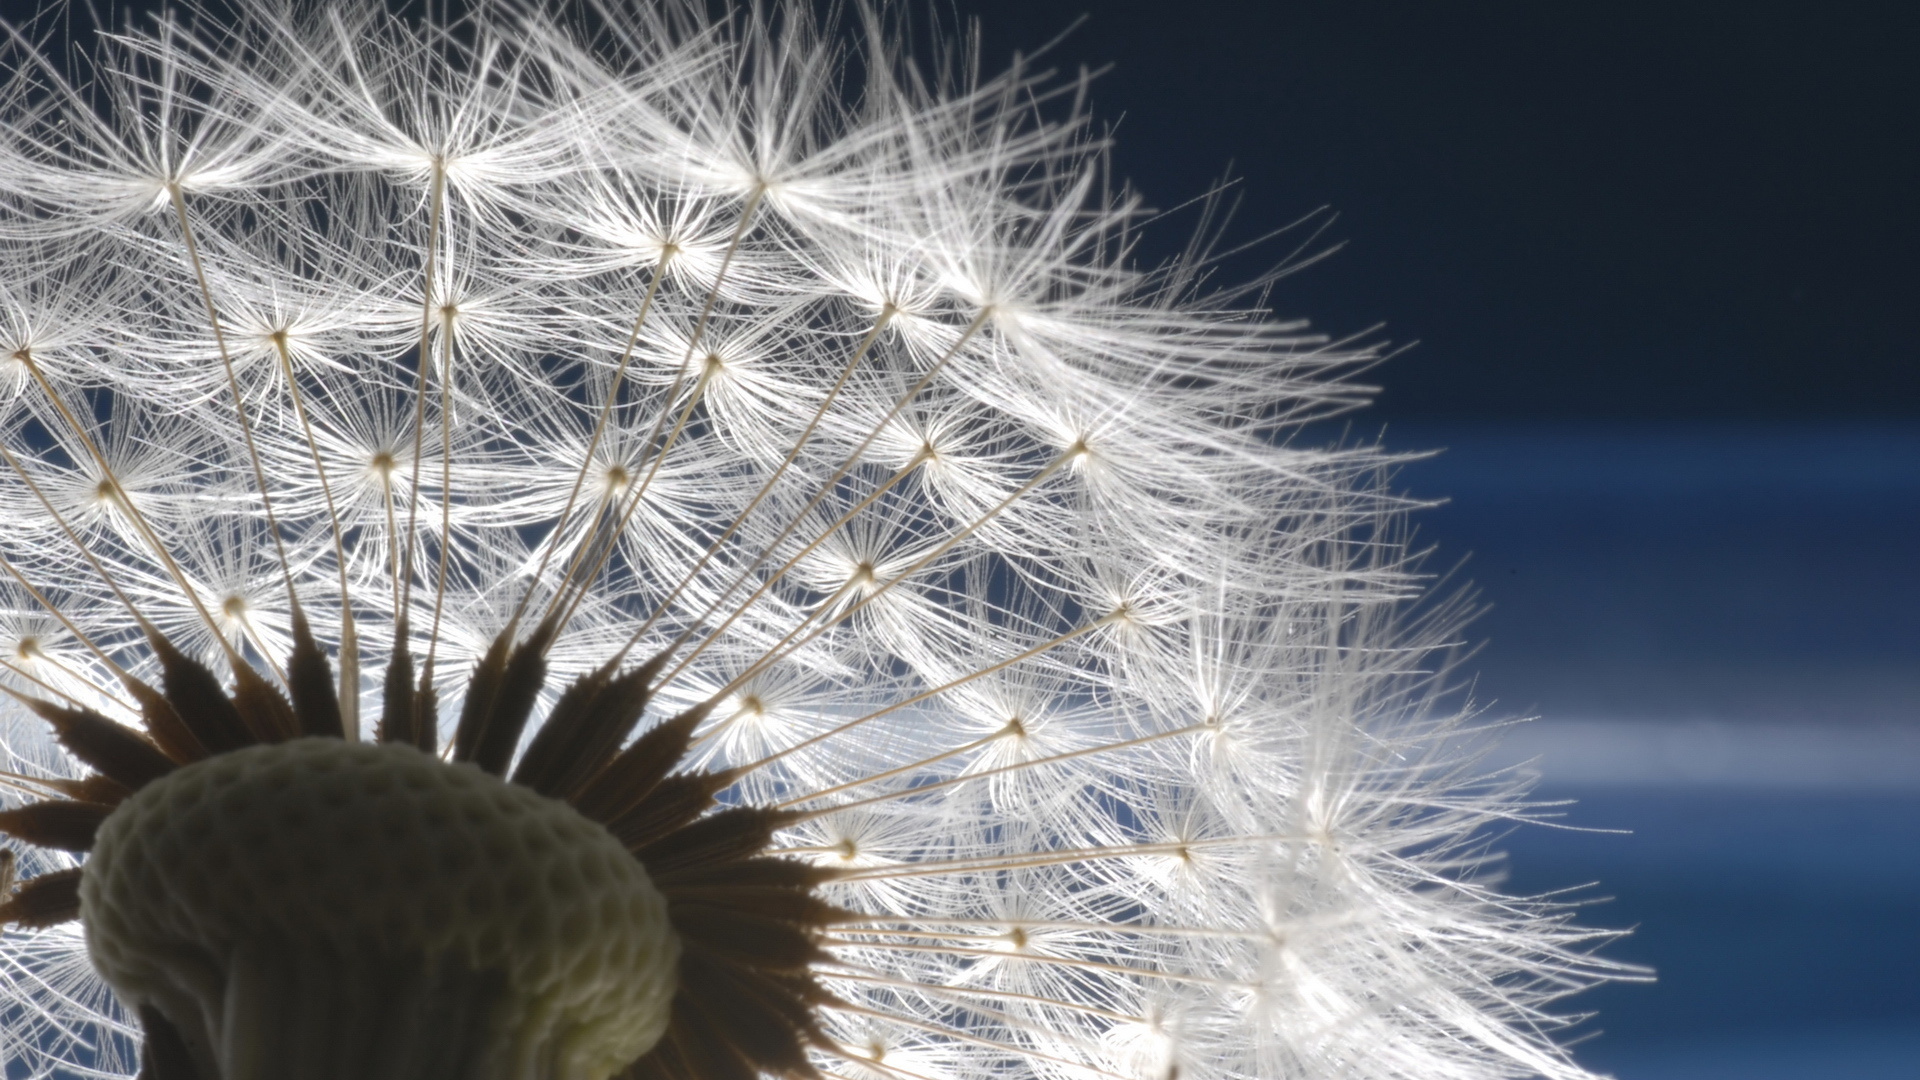 300+ Dandelion HD Wallpapers and Backgrounds